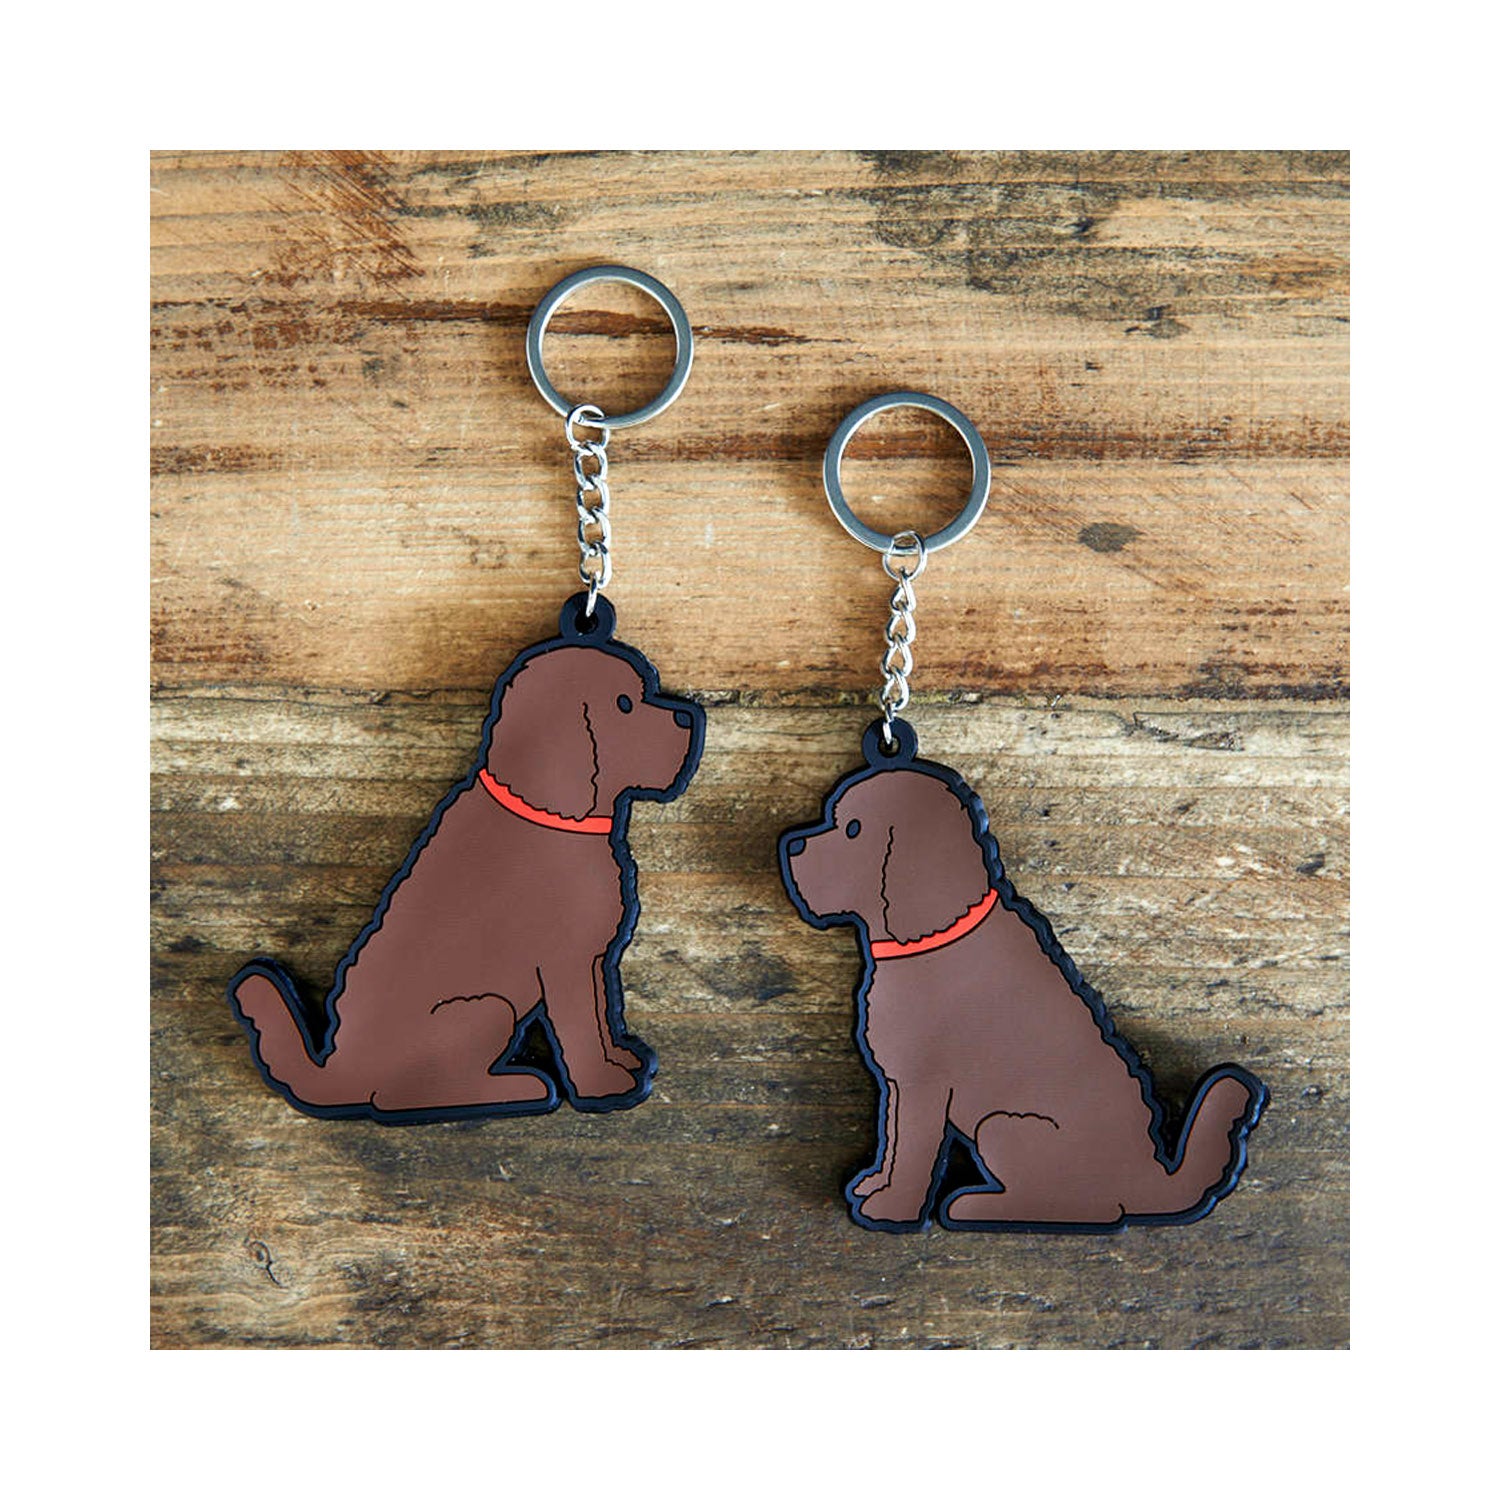 Dog Lover Gifts available at Dog Krazy Gifts - Herbie The Cockerpoo Keyring - part of the Sweet William range available from Dog Krazy Gifts